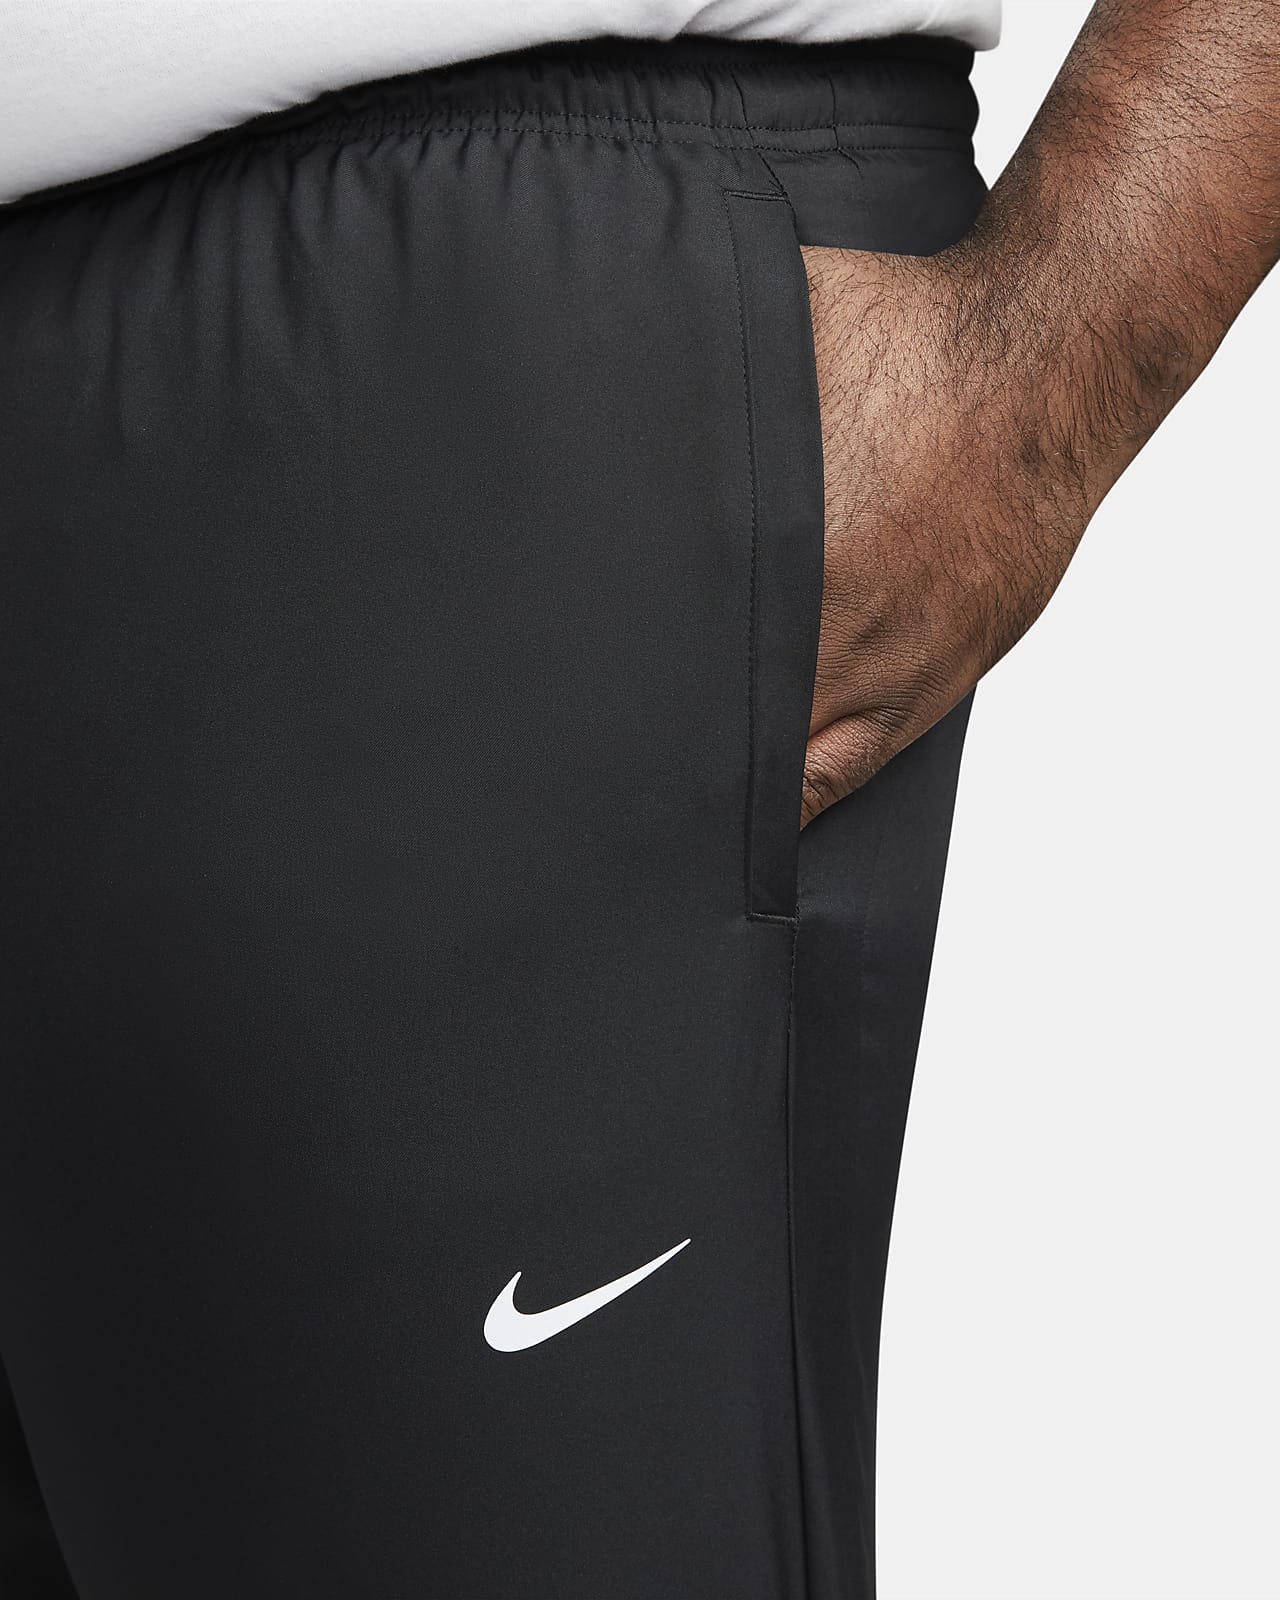 Nike Dri-FIT Challenger Men's Woven Running Trousers. Nike ID